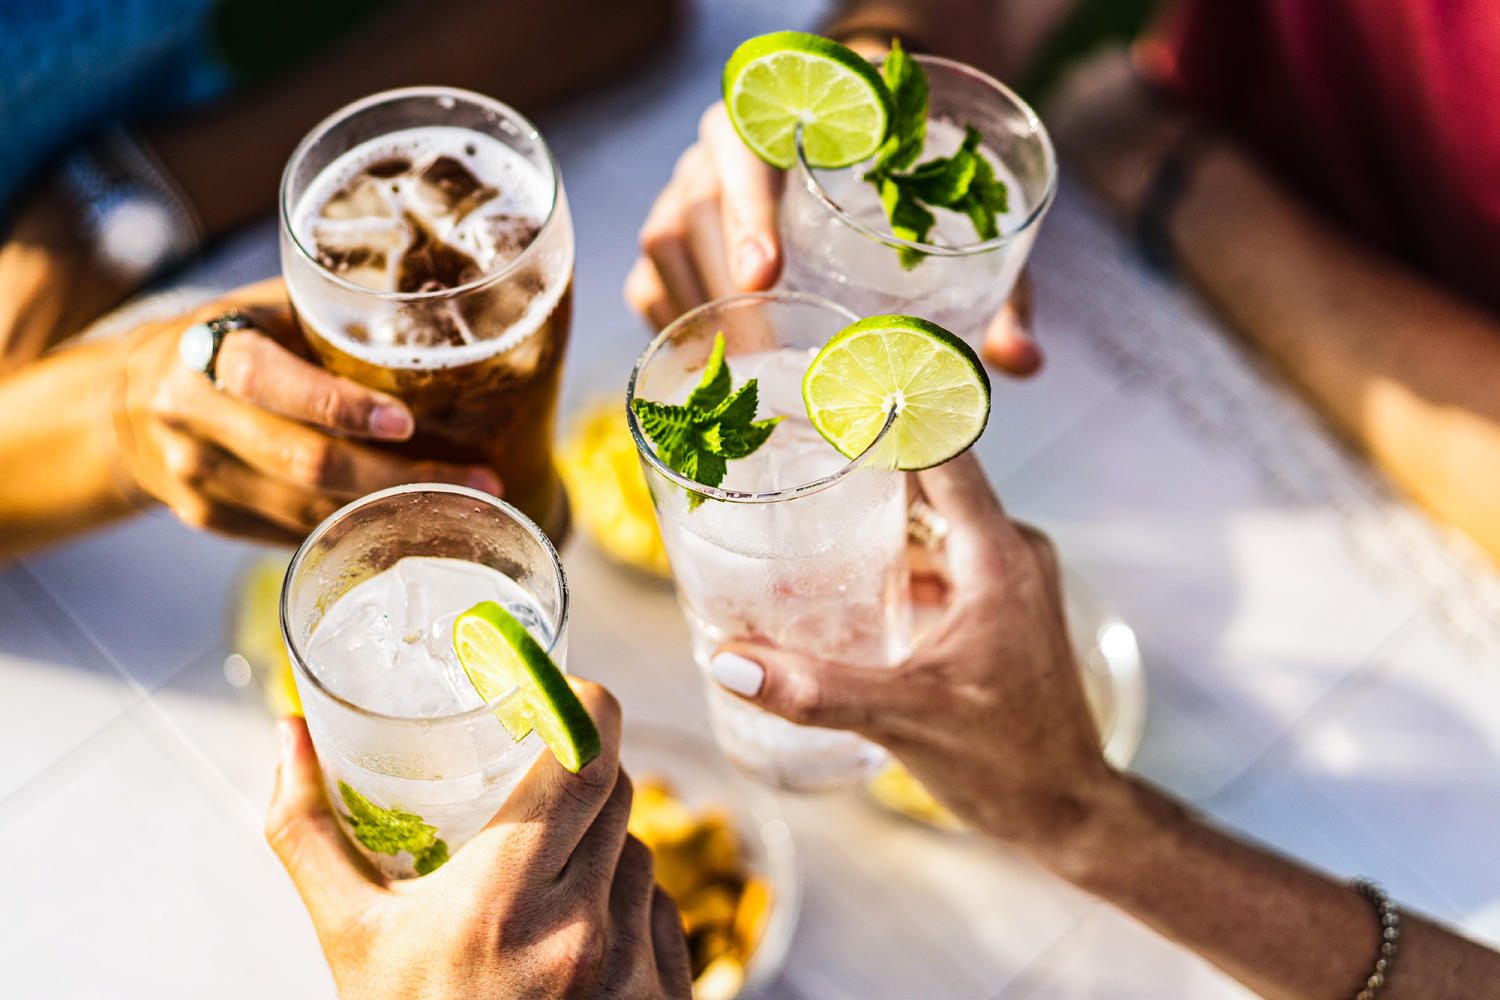 This summer's best happy hour deal isn't at your local bar